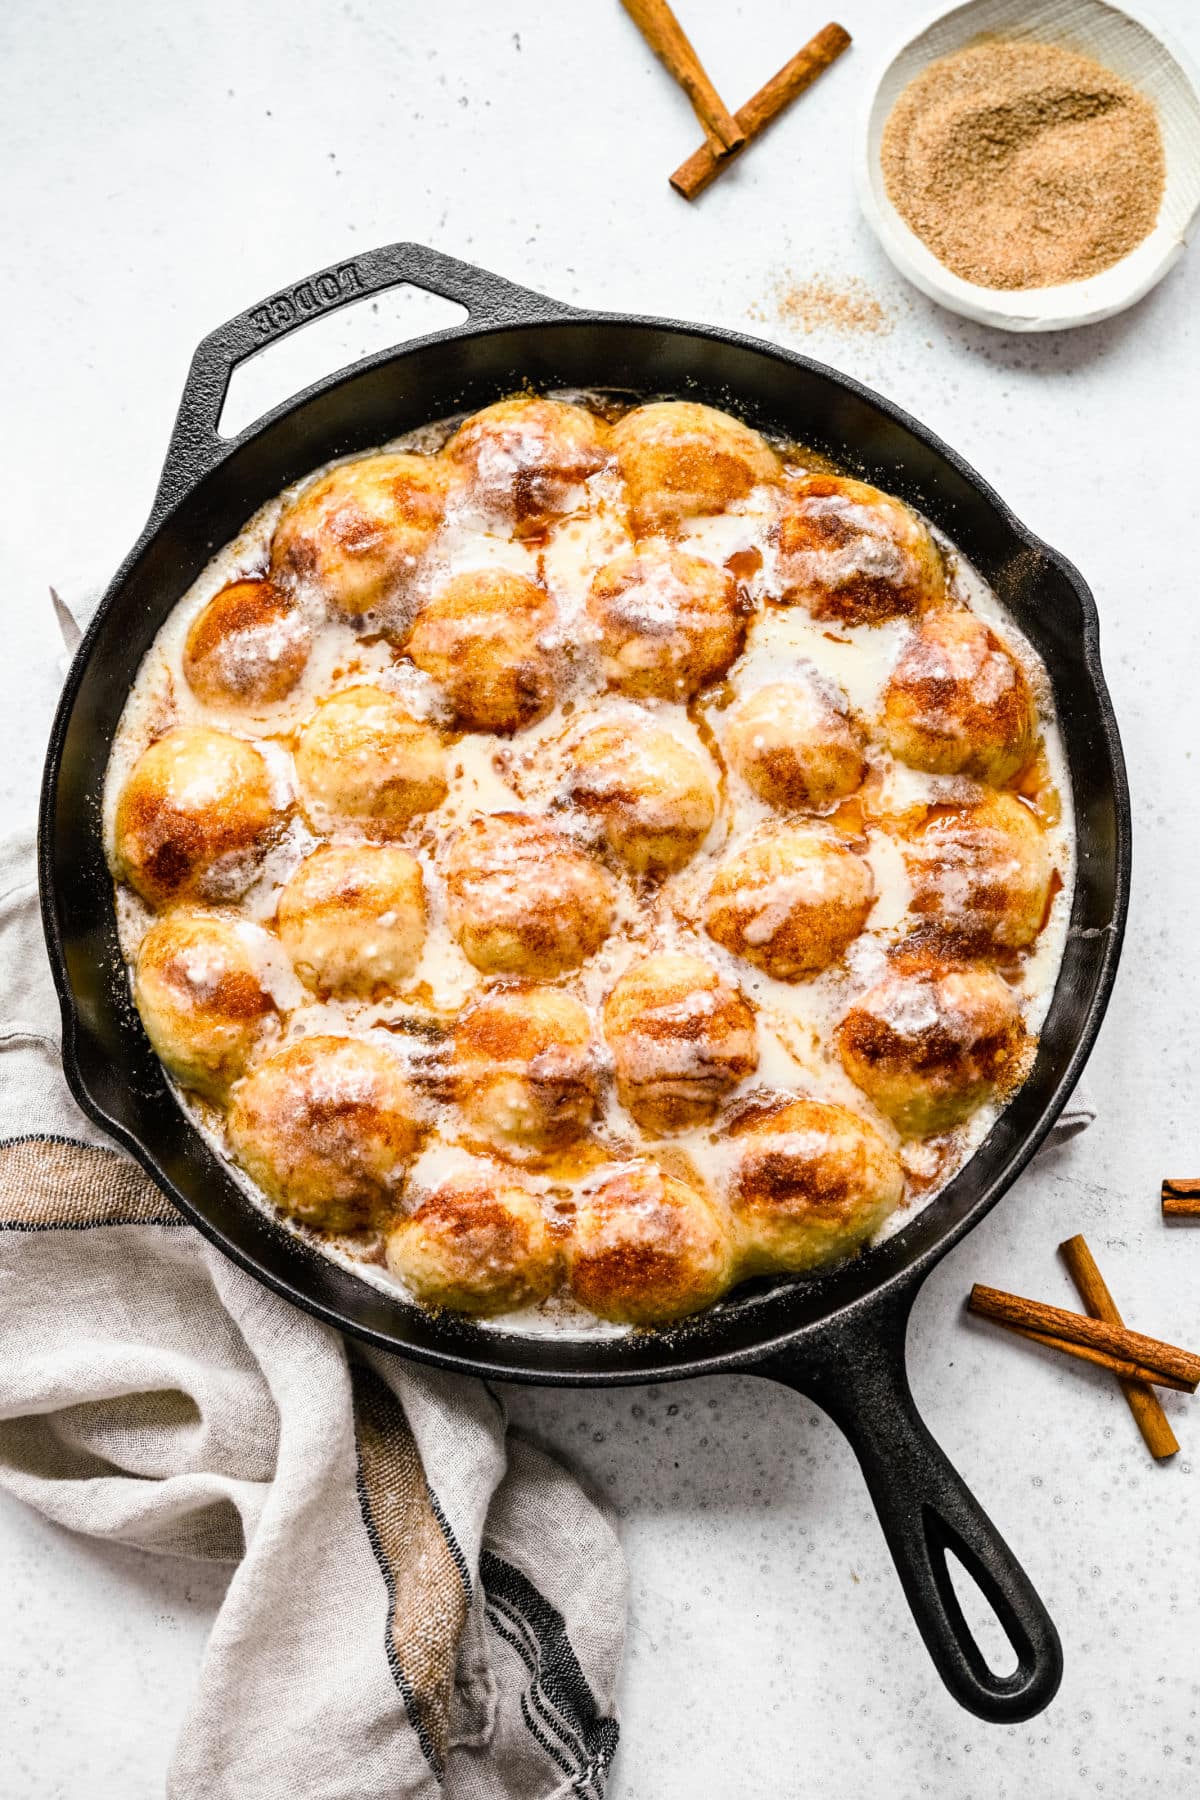 Cinnamon roll bites in a cast iron skillet next to a dish of cinnamon sugar.